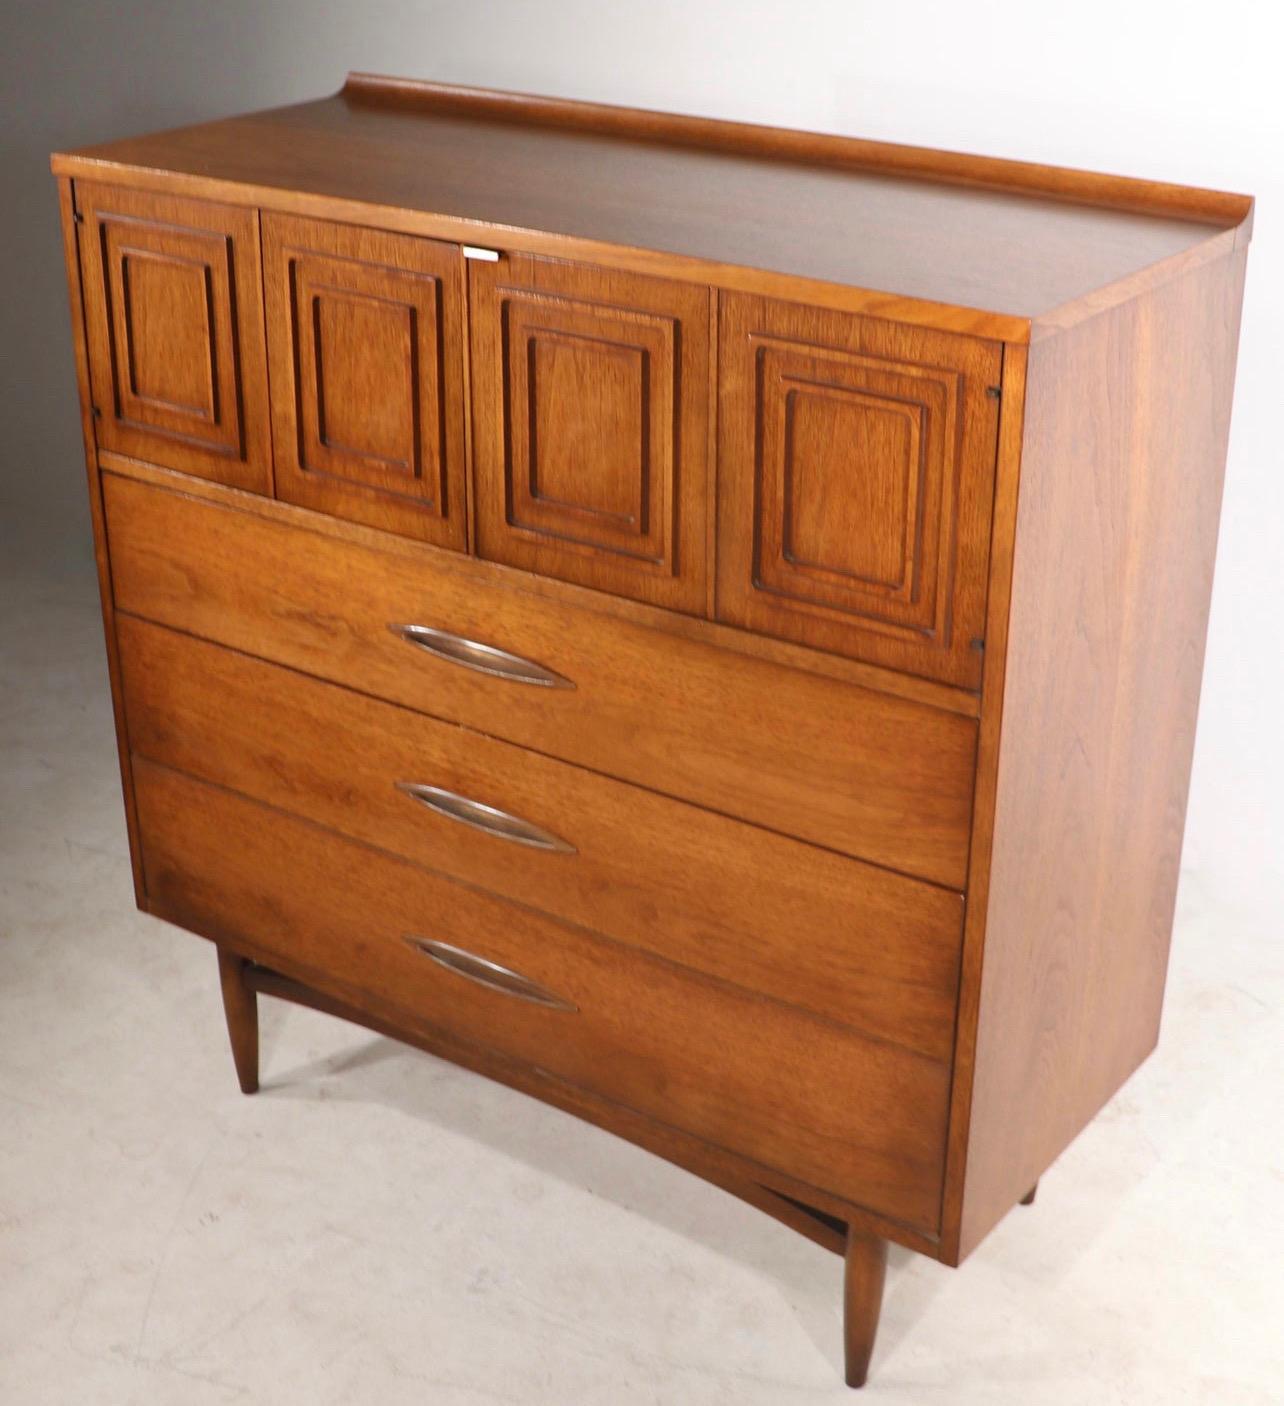 Vintage Mid-Century Modern dresser with dovetail drawers cabinet storage

Dimensions. 42 W ; 43 H ; 17 D.